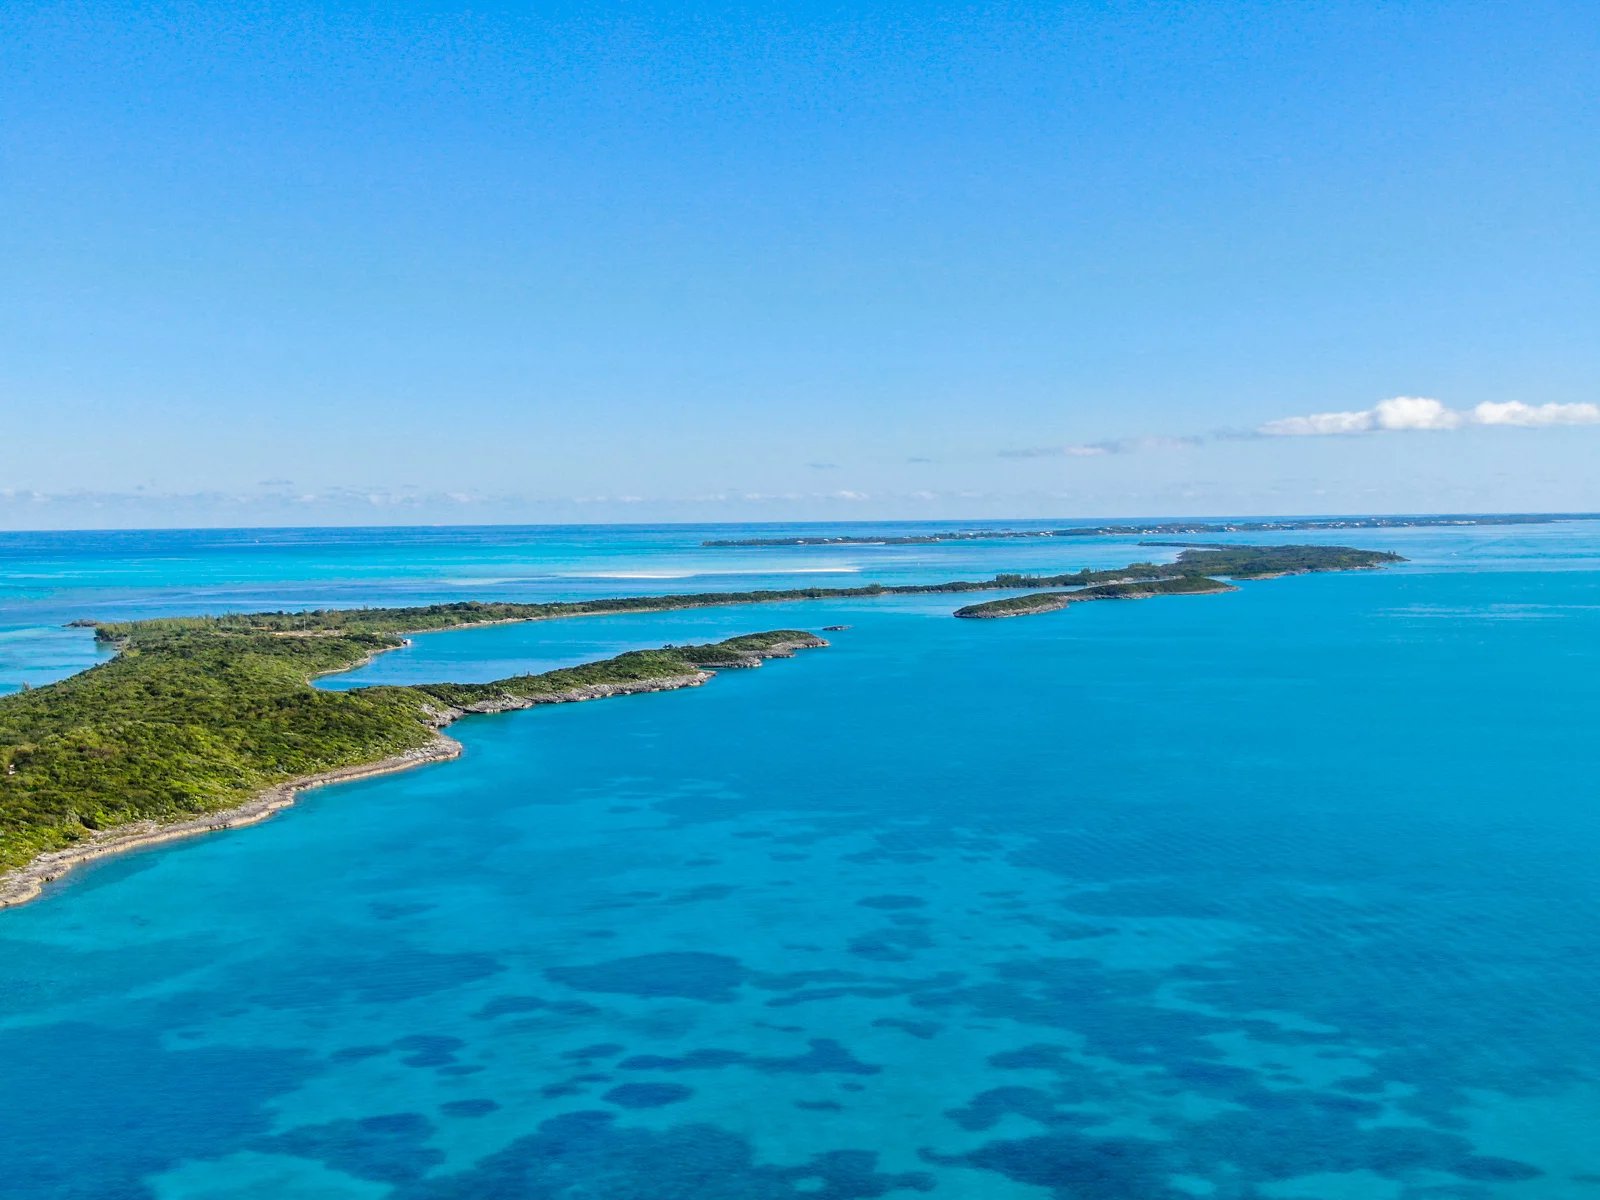 royal island, the perfect private island opportunity - mls 51444 image39